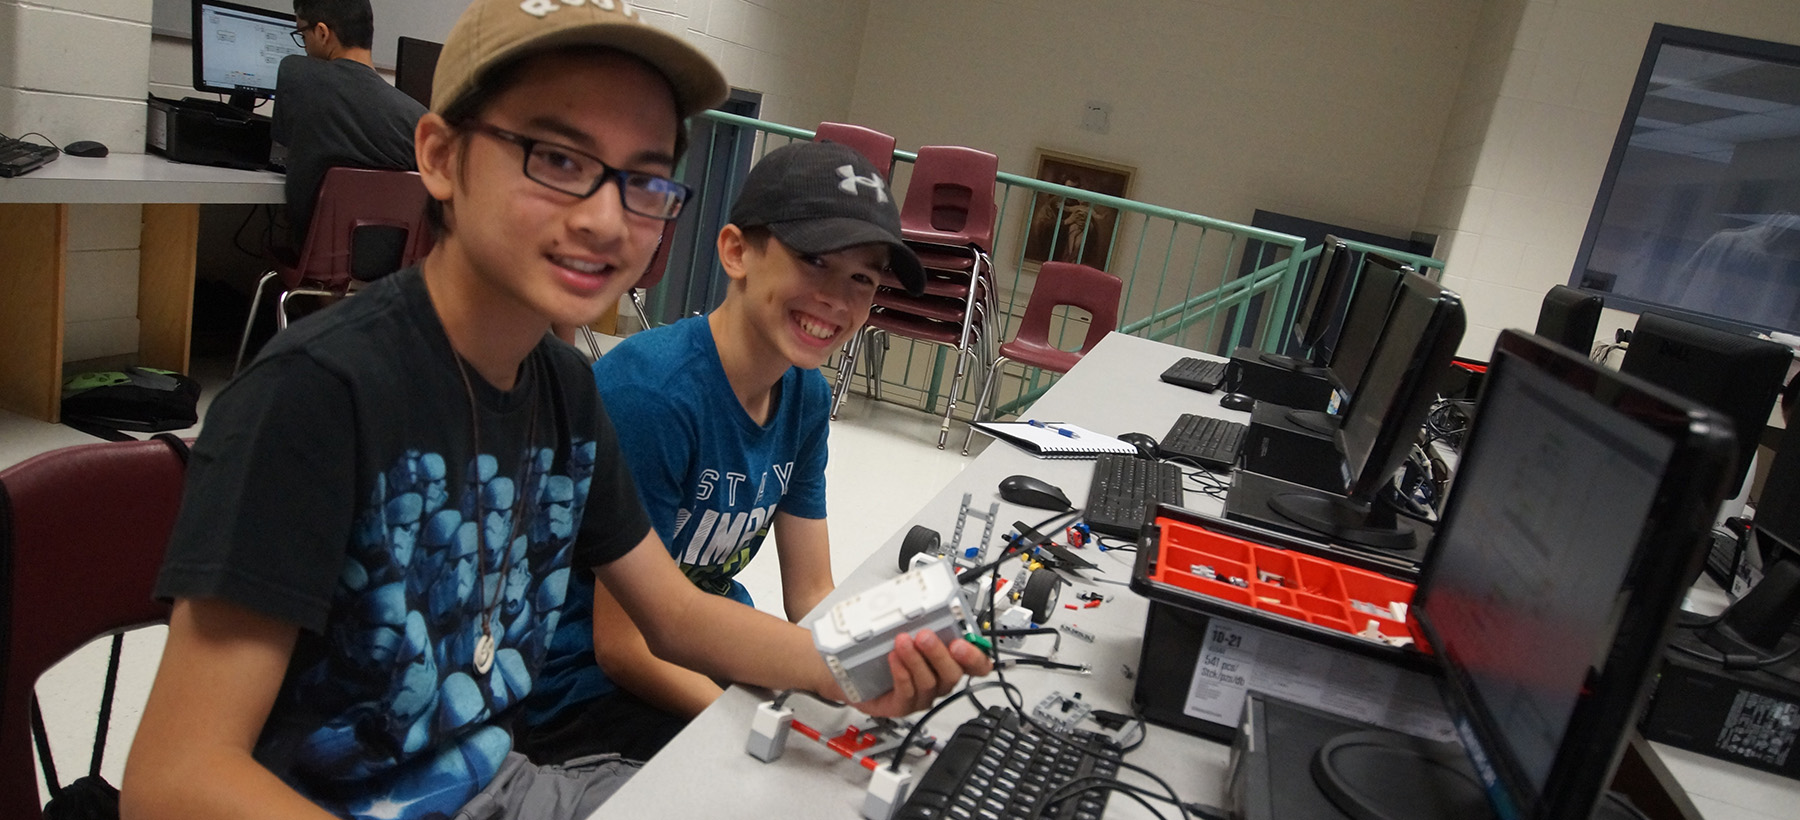 Two male students on a computer